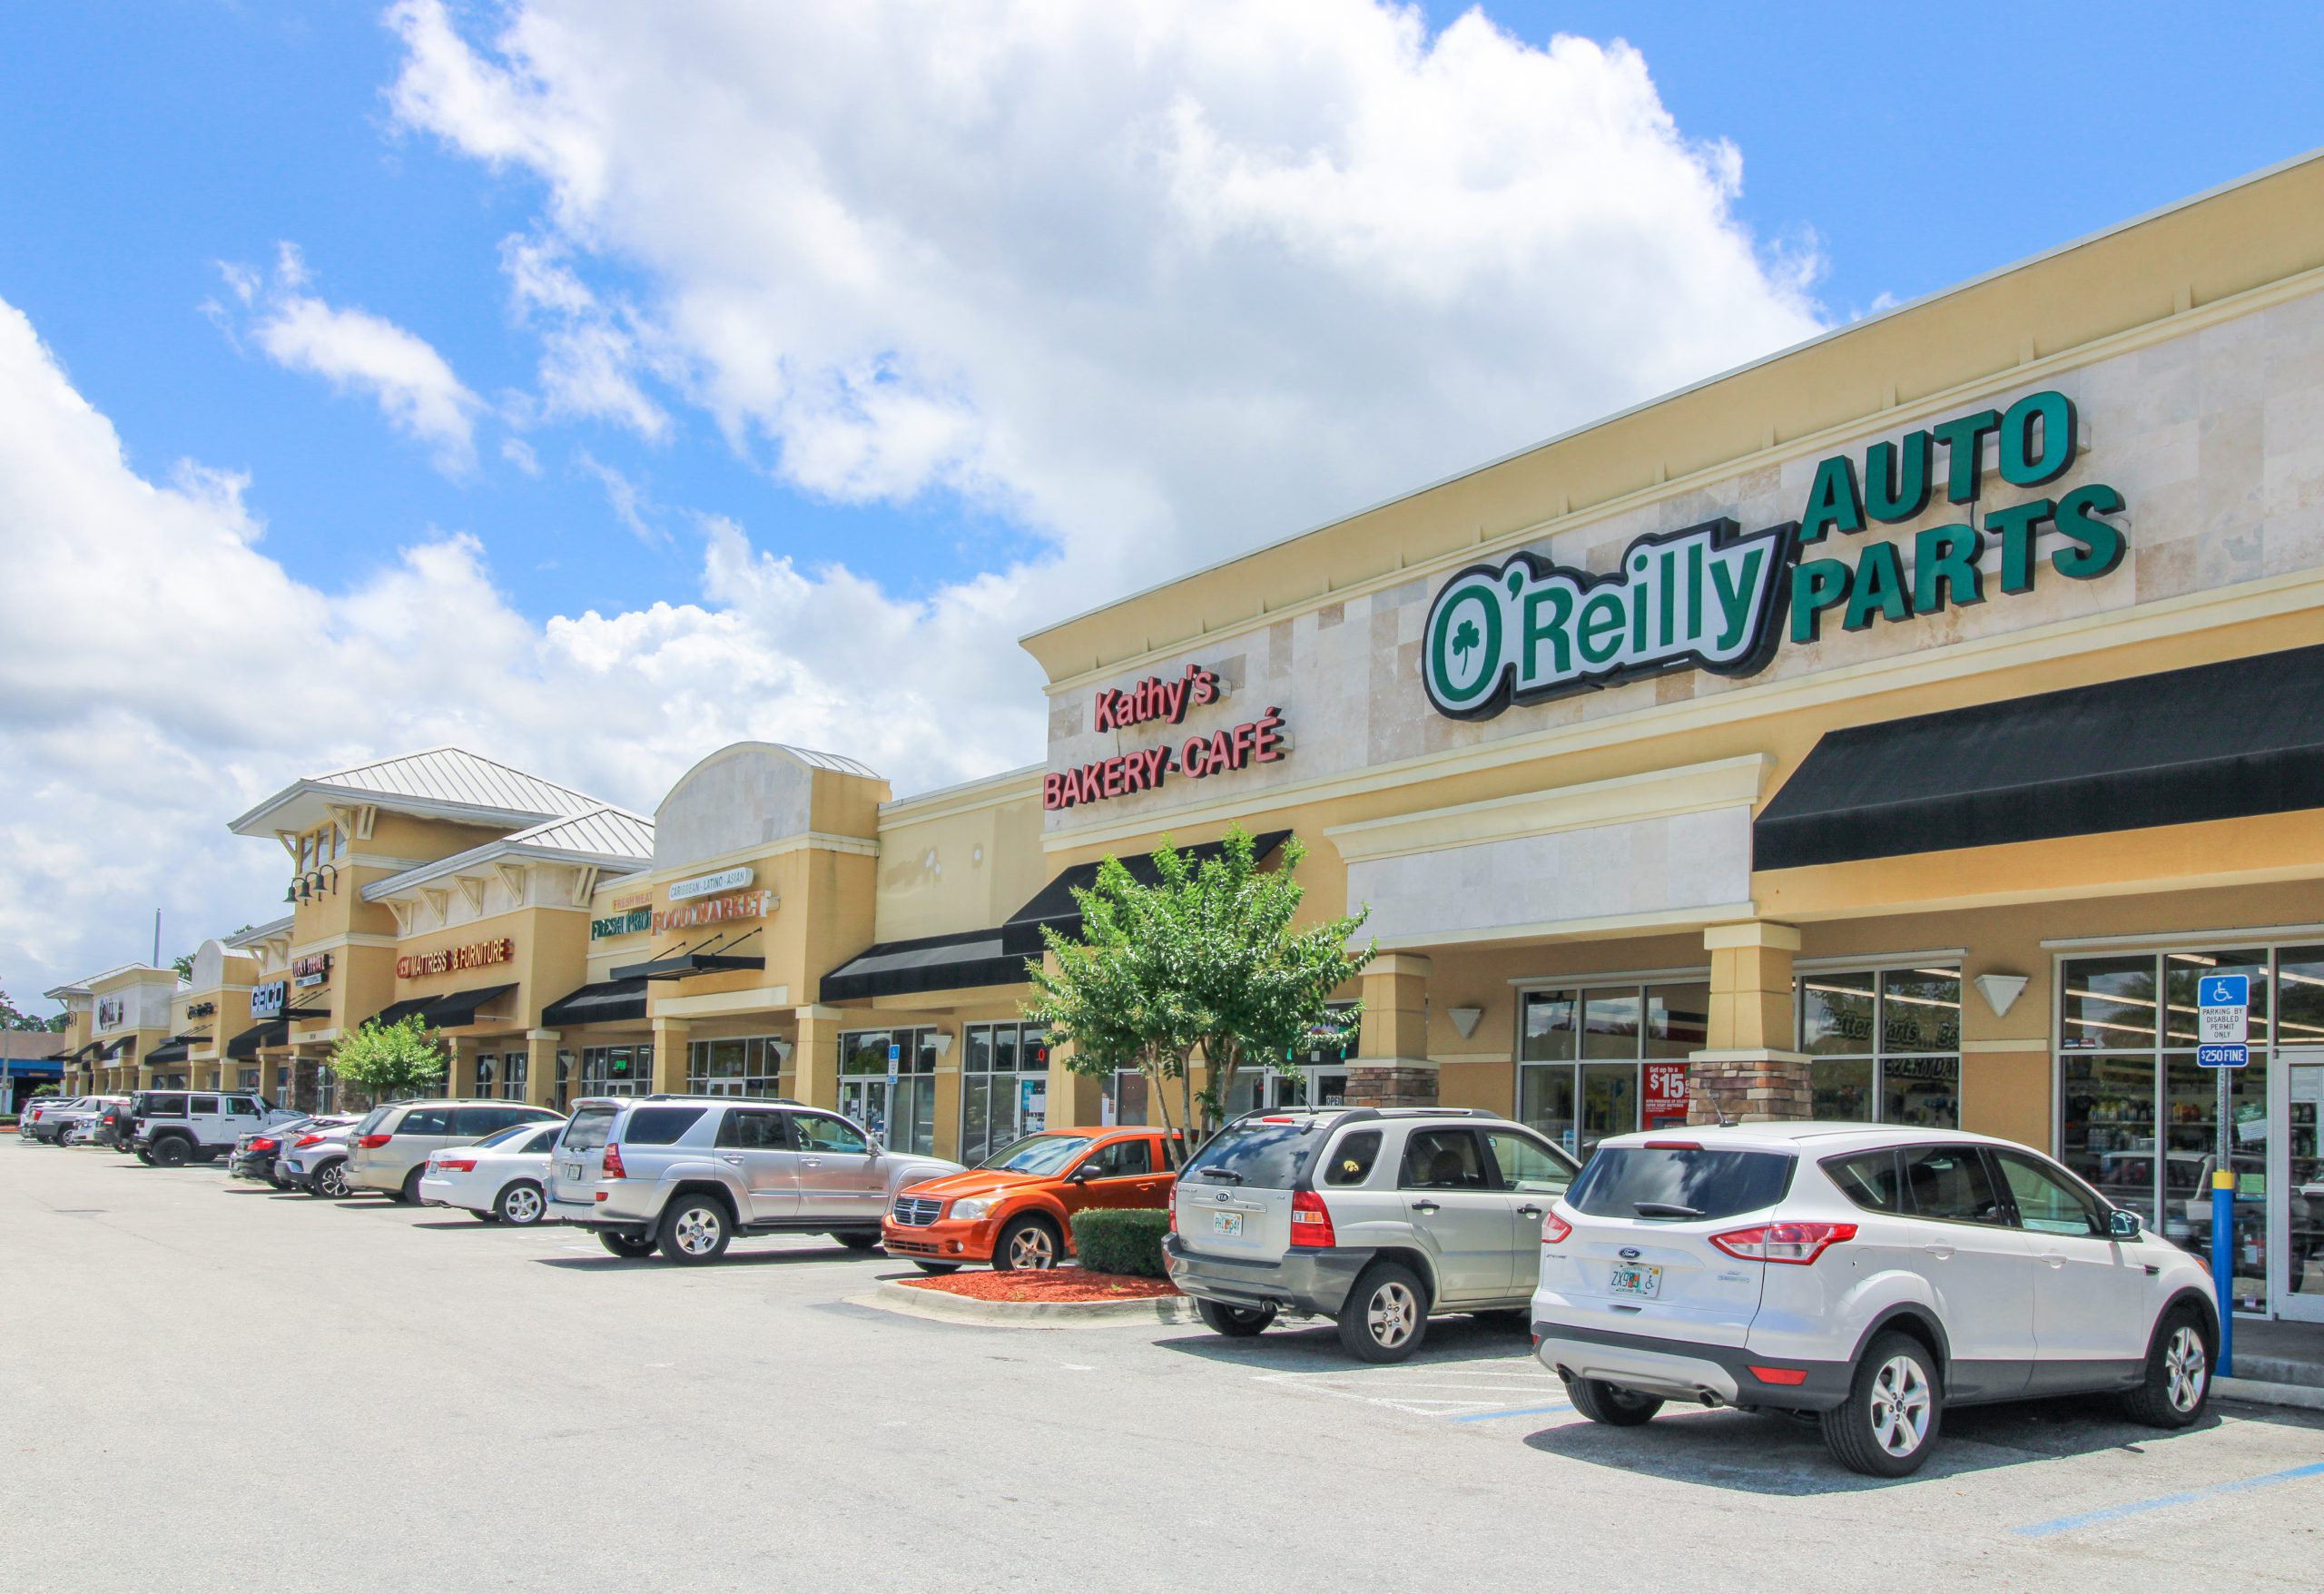 A one-story retail center.